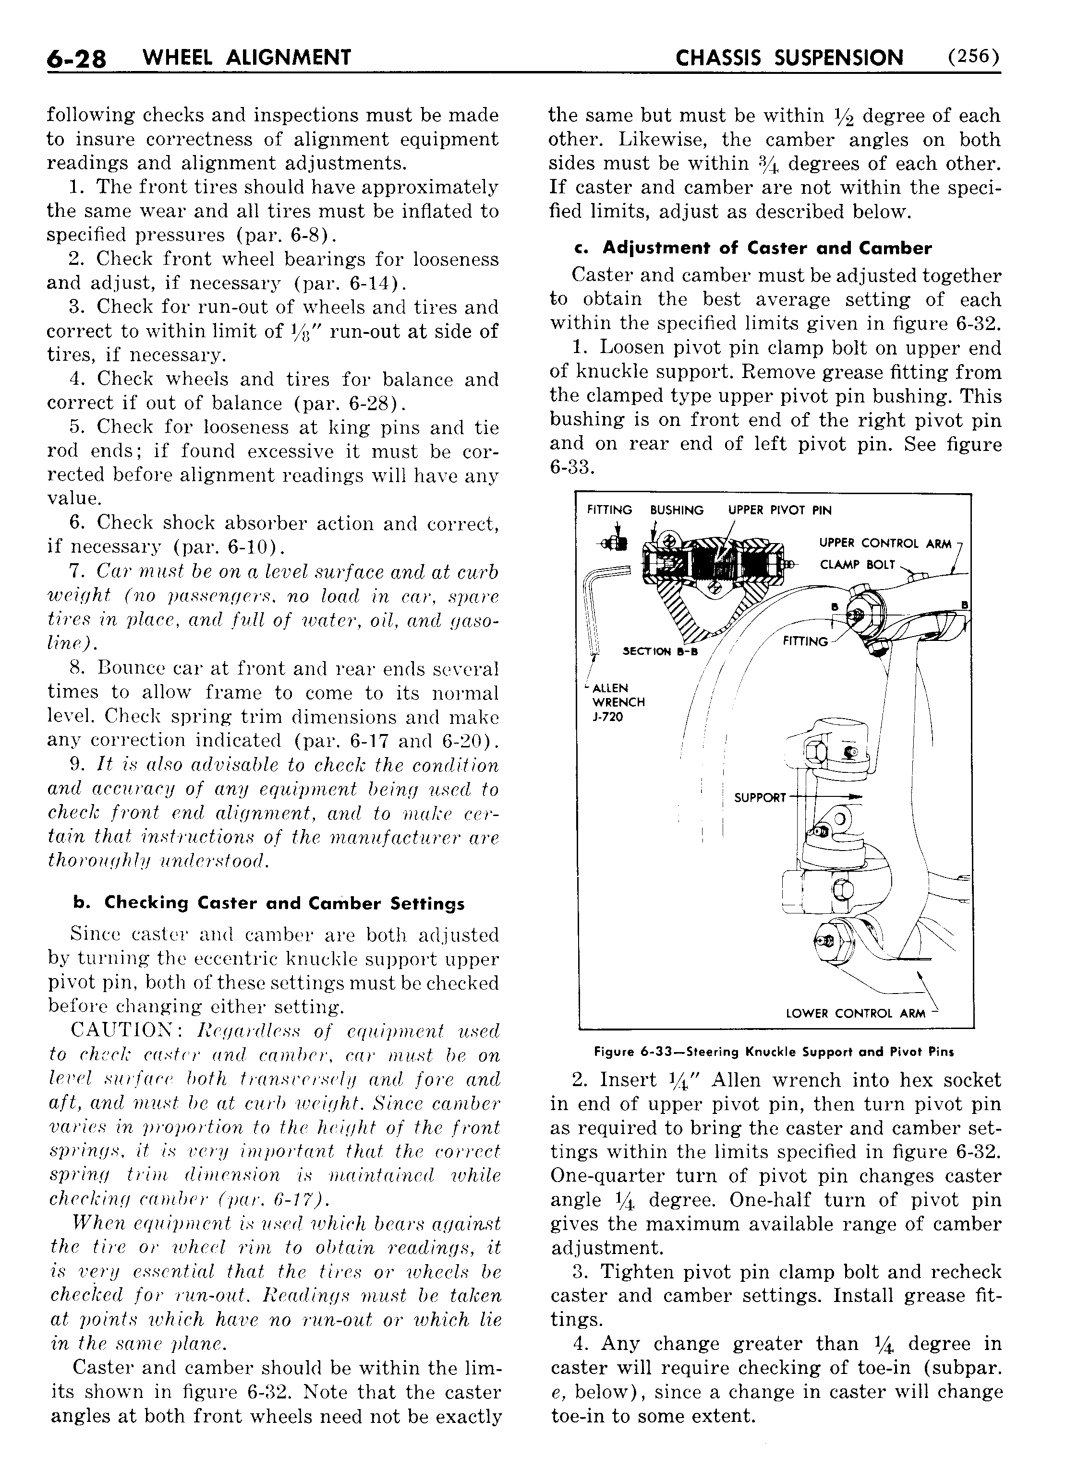 n_07 1951 Buick Shop Manual - Chassis Suspension-028-028.jpg